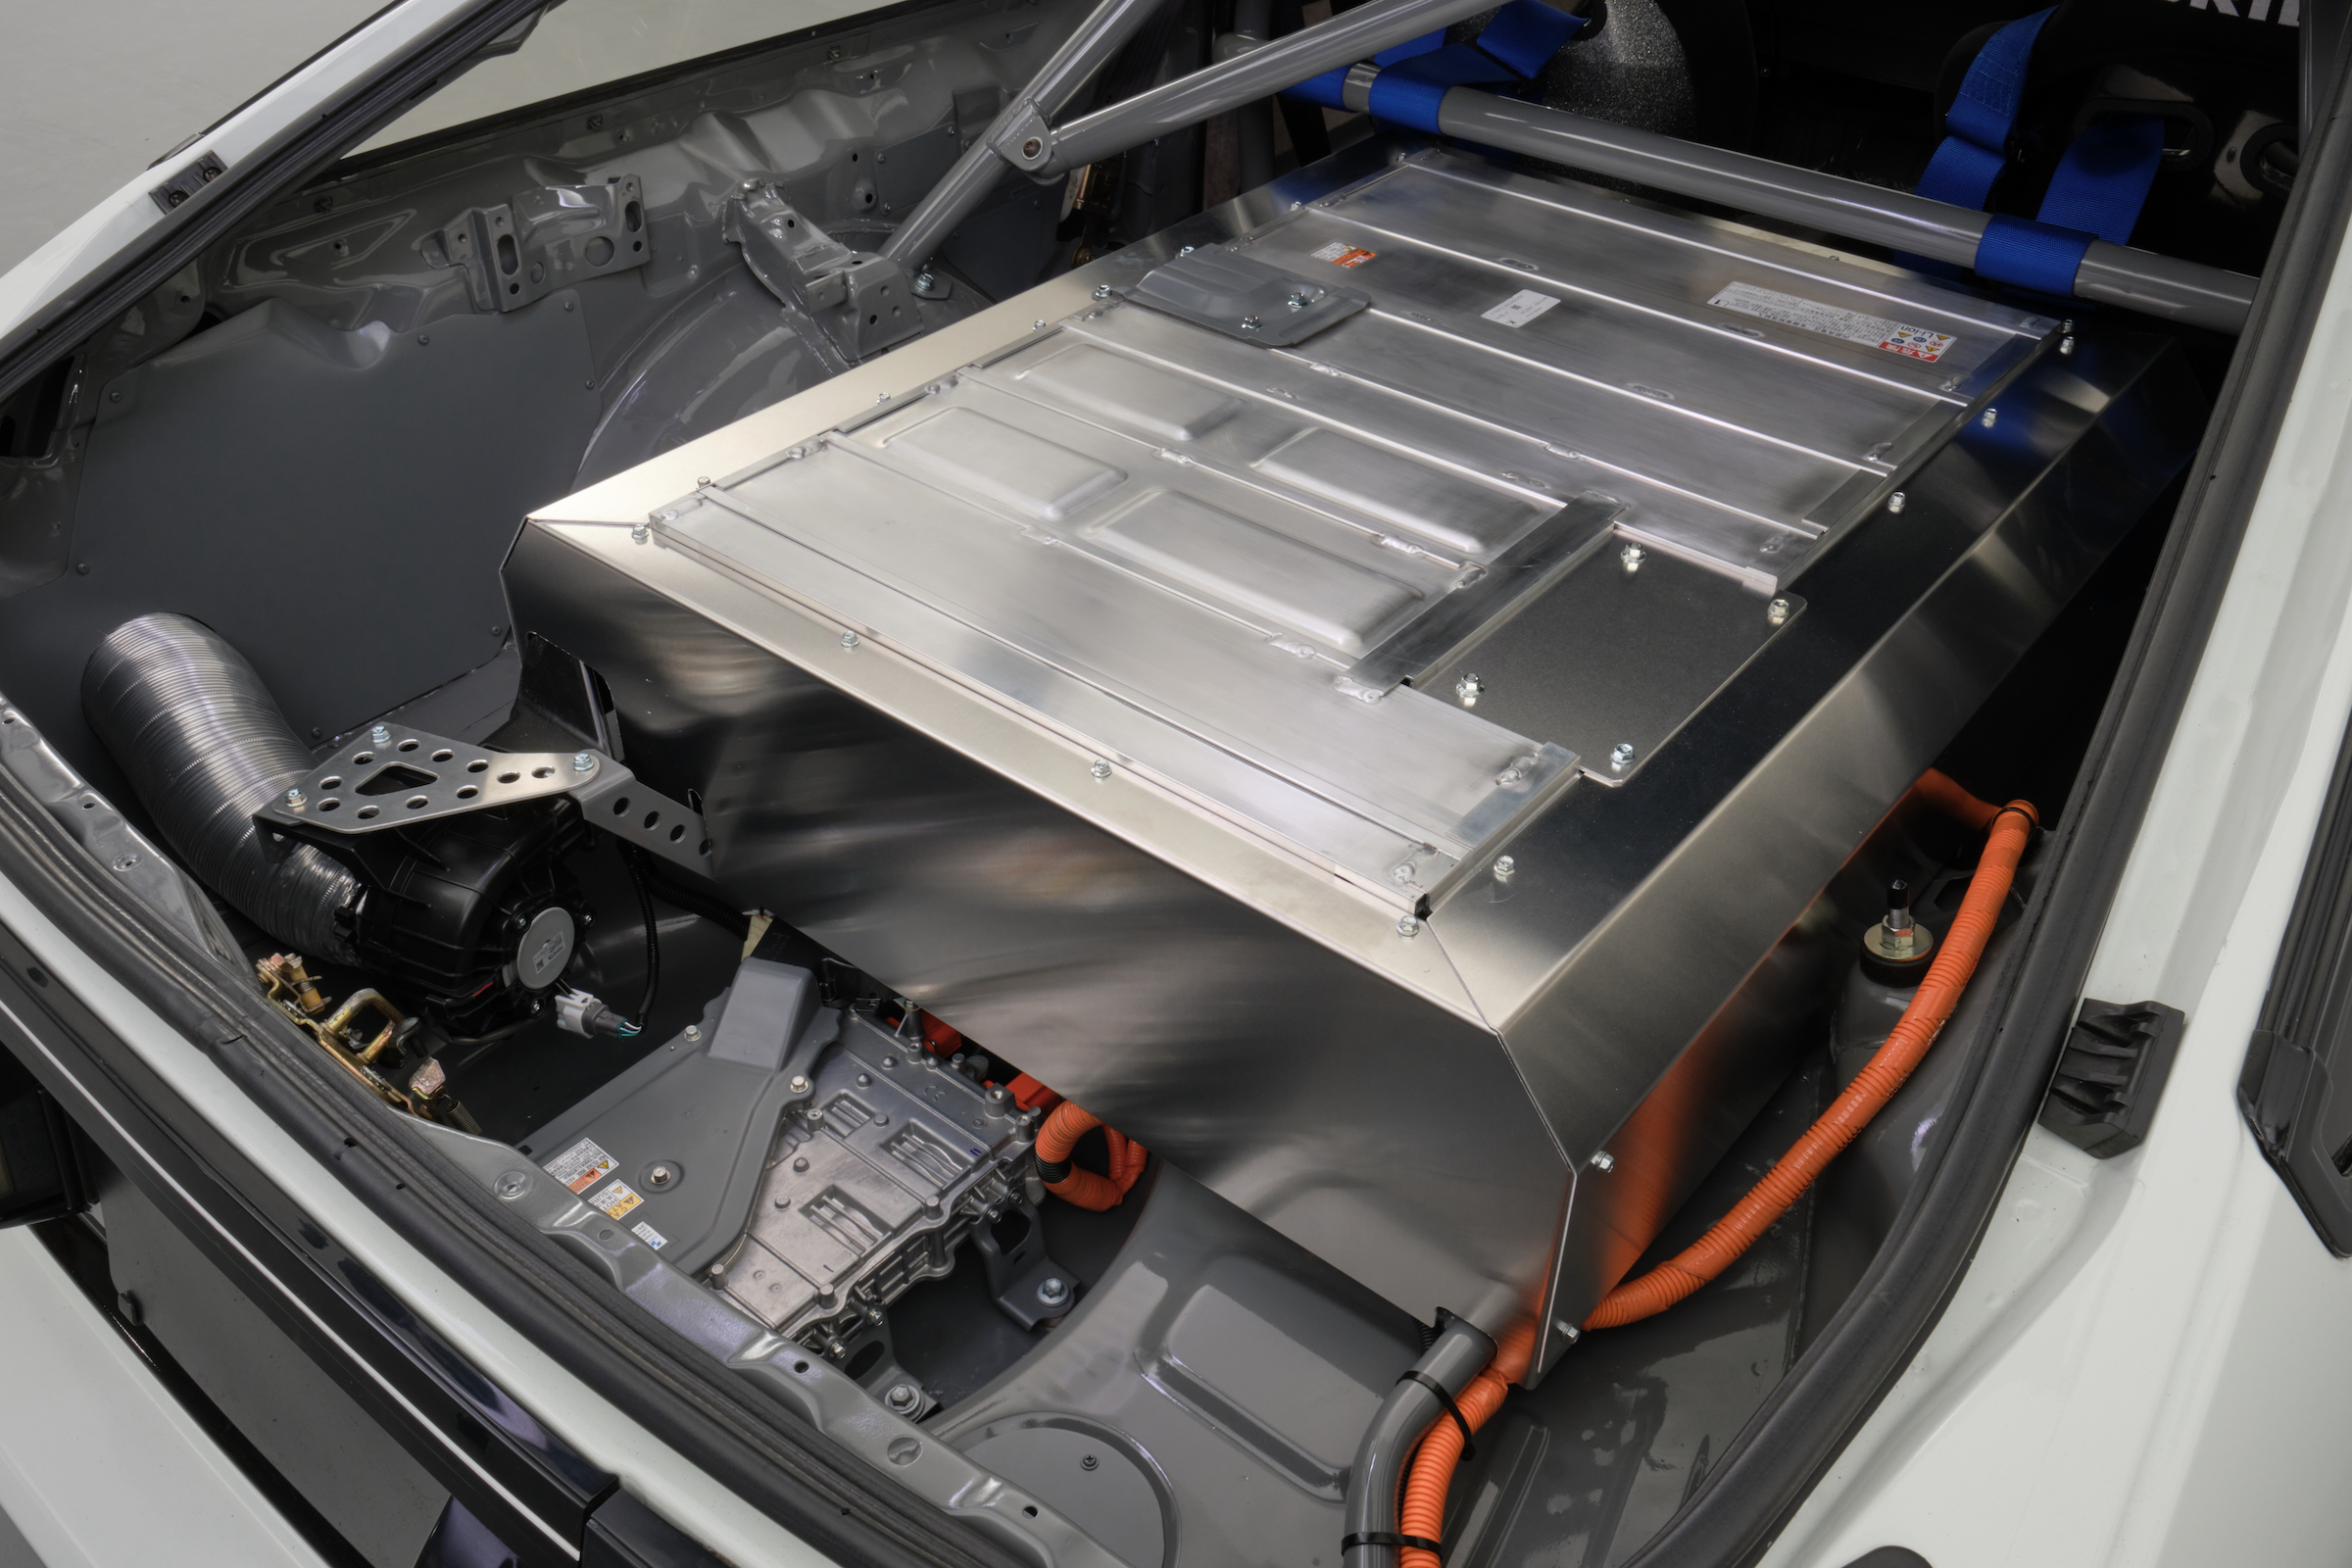 Toyota AE86 electric batteries